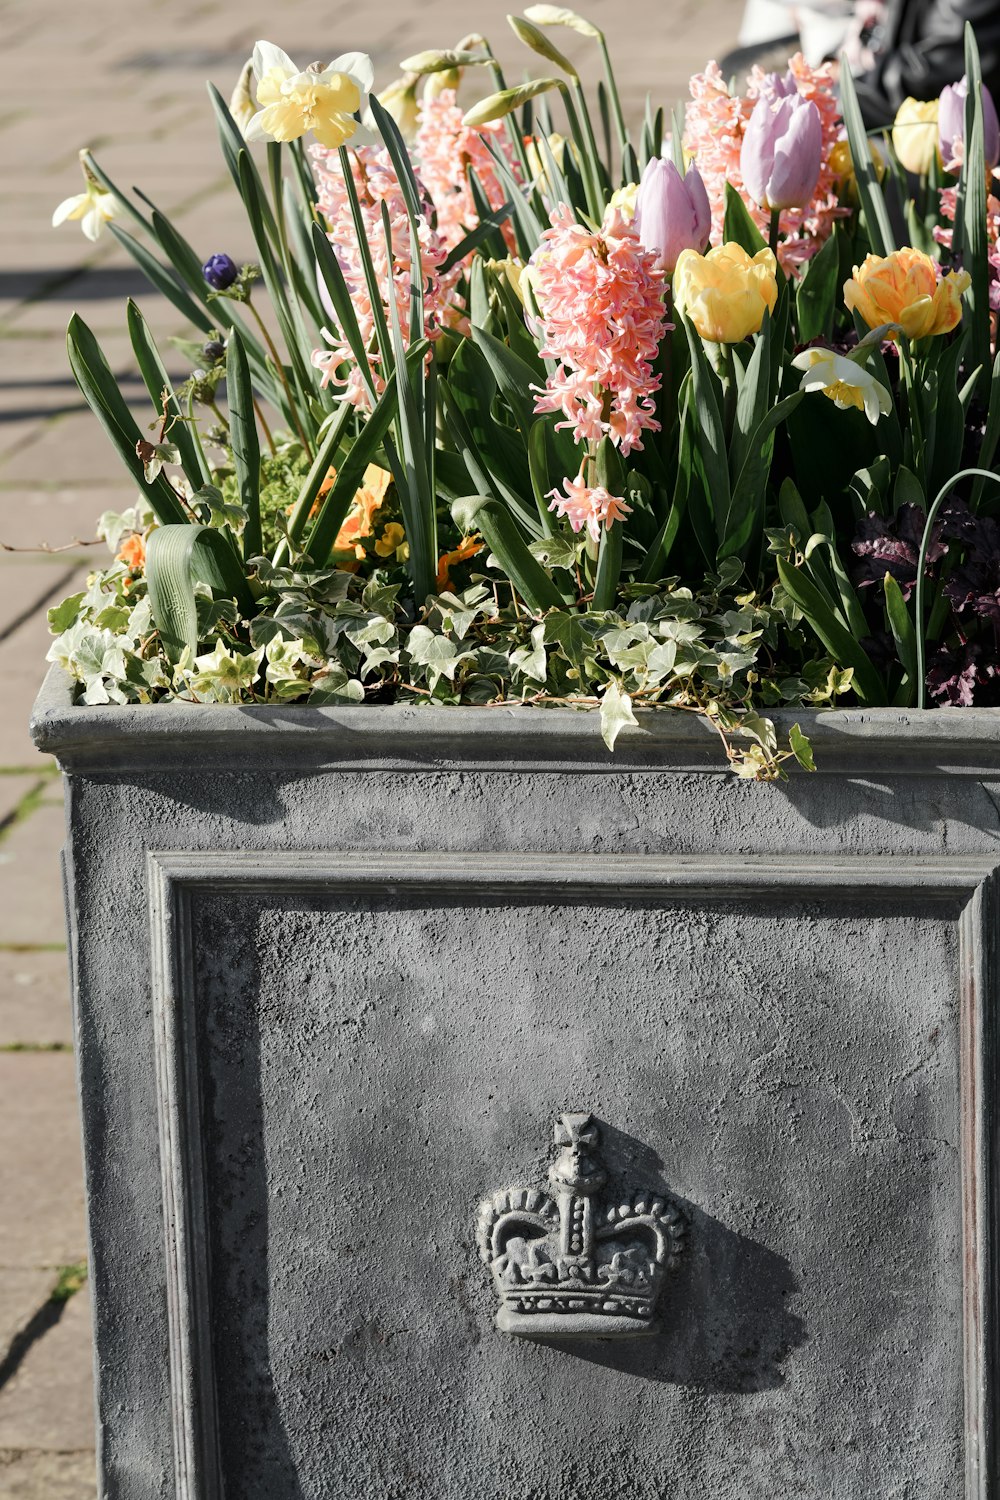 a planter with flowers in it sitting on a sidewalk